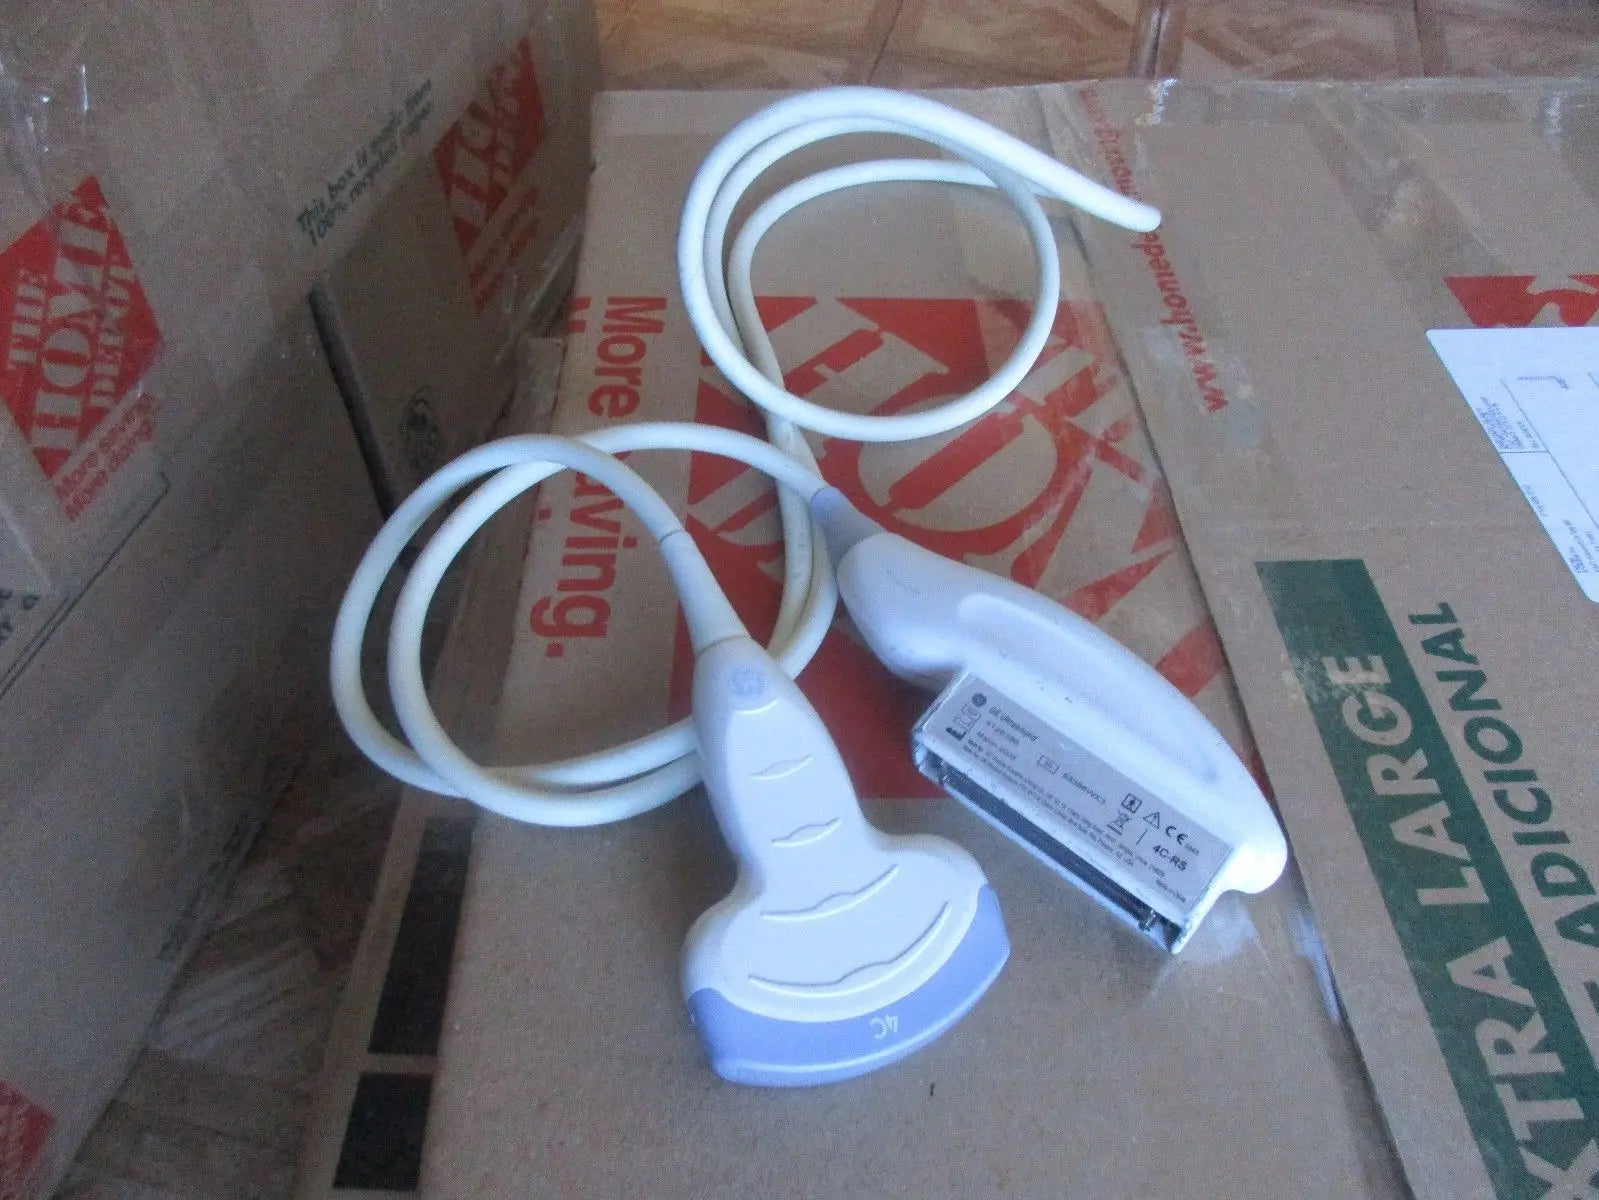 GE 4C-RS ULTRASOUND PROBE/TRANSDUCER REF# 5125386 DIAGNOSTIC ULTRASOUND MACHINES FOR SALE